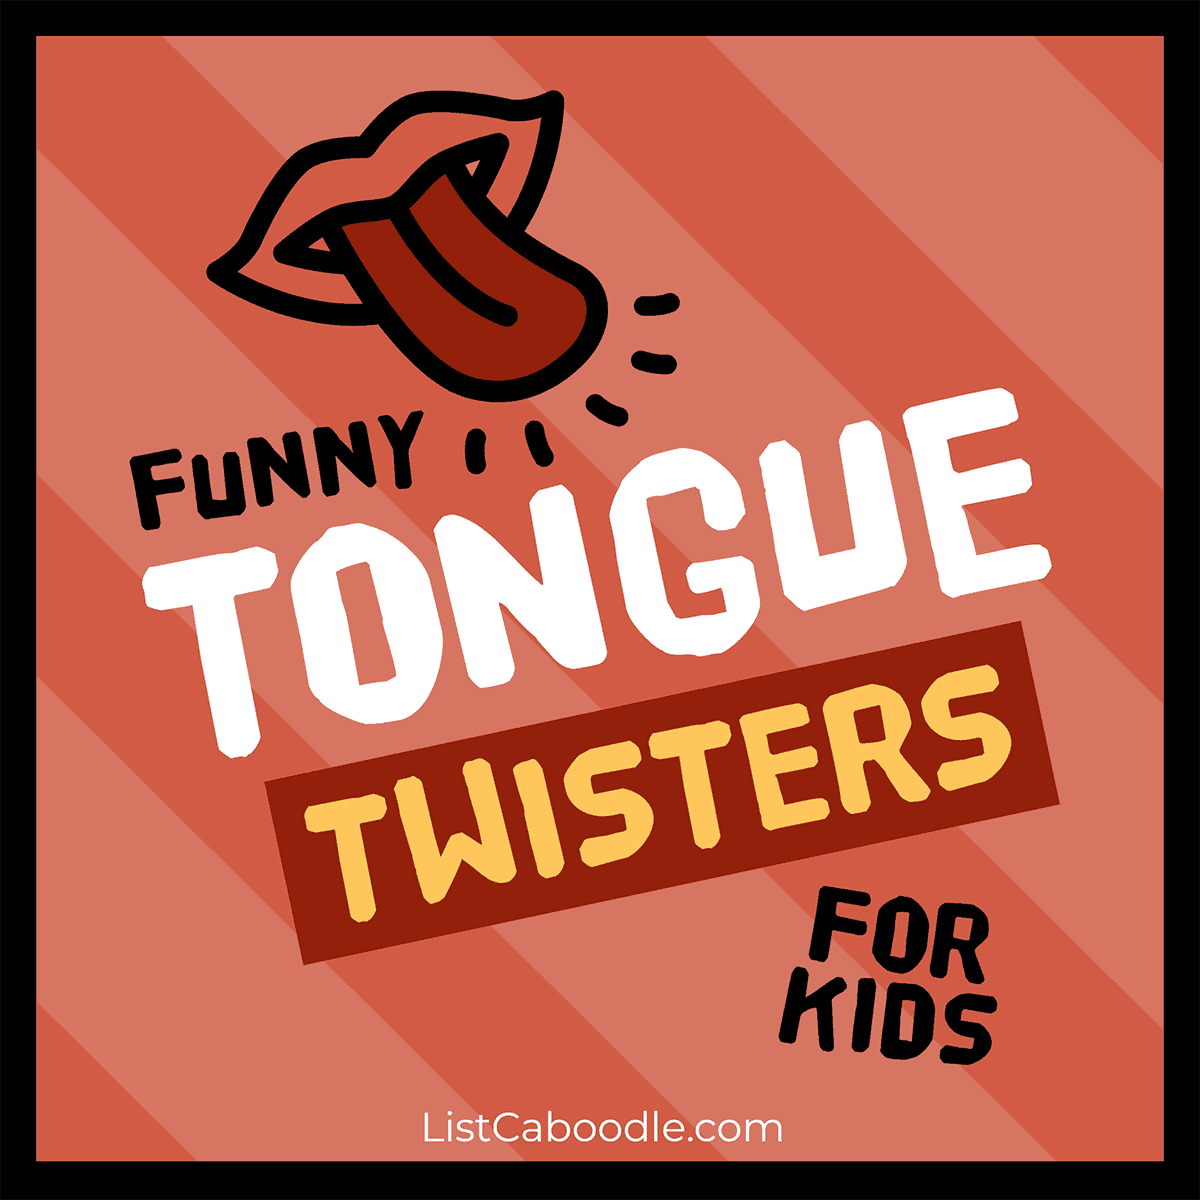 funny tongue twisters for kids